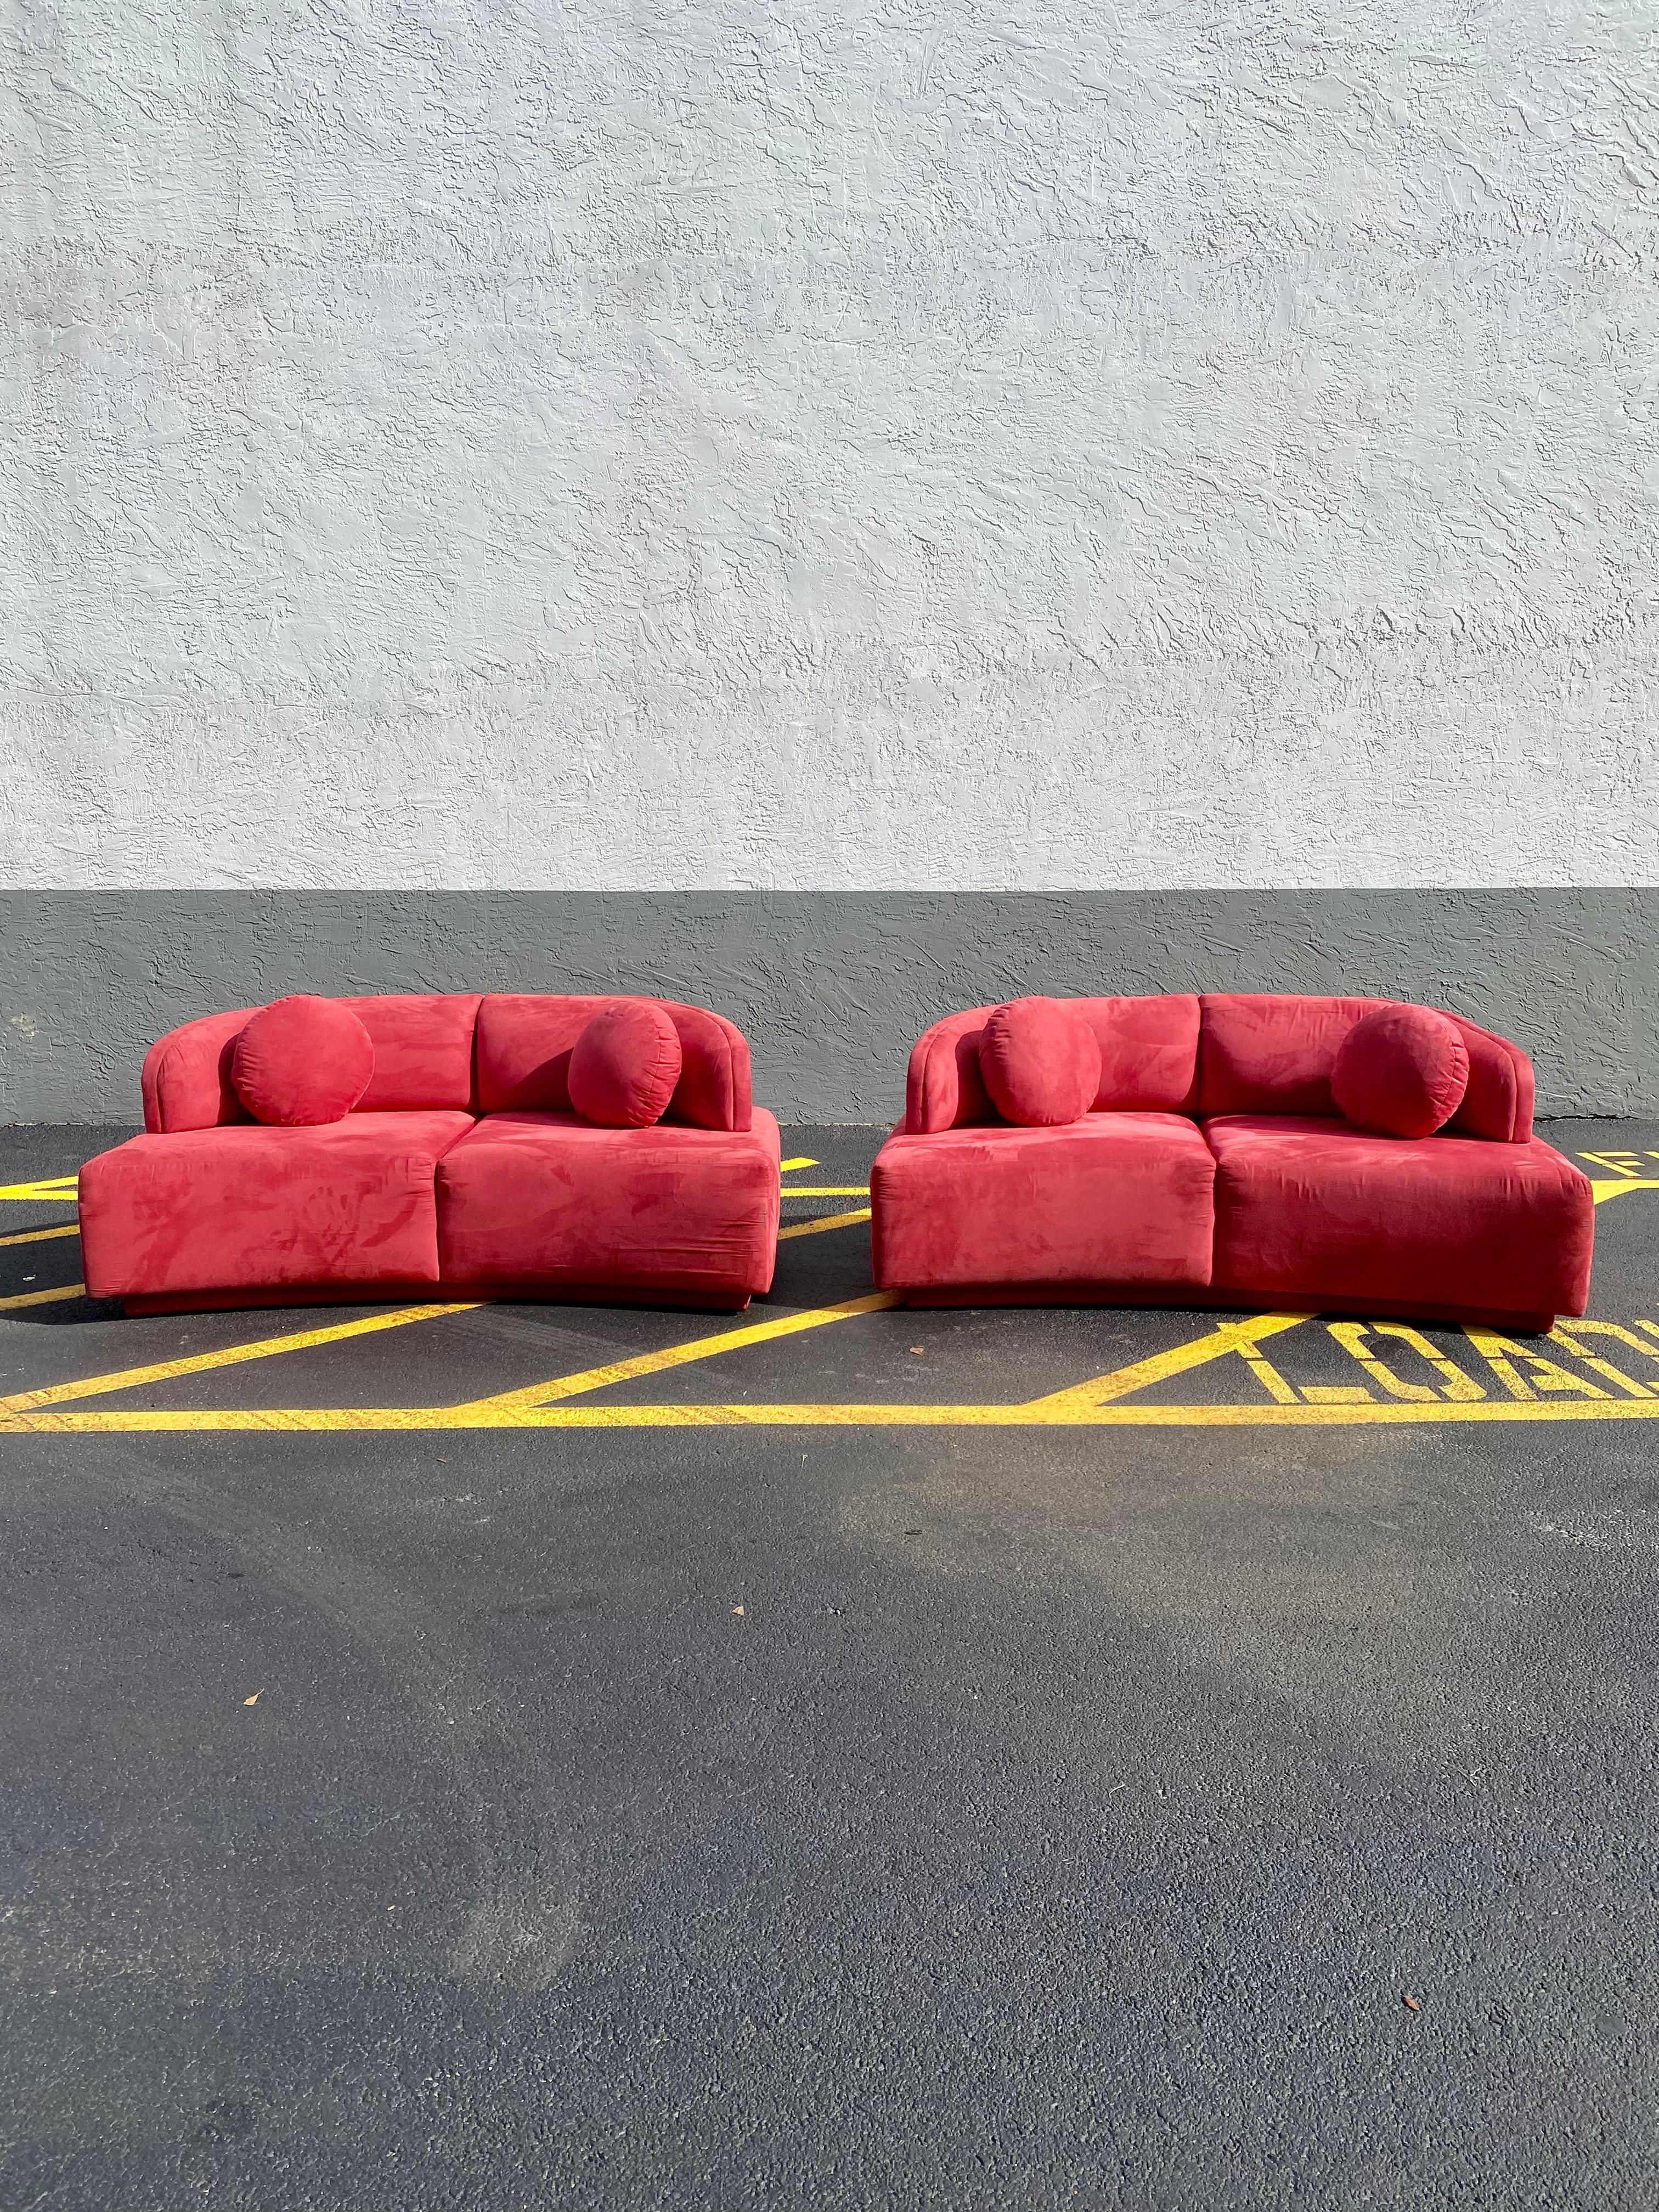 On offer on this occasion is one of the most stunning, cloud sofa set you could hope to find. This is an ultra-rare opportunity to acquire Outstanding design is exhibited throughout. The beautiful setis statement piece which is also extremely